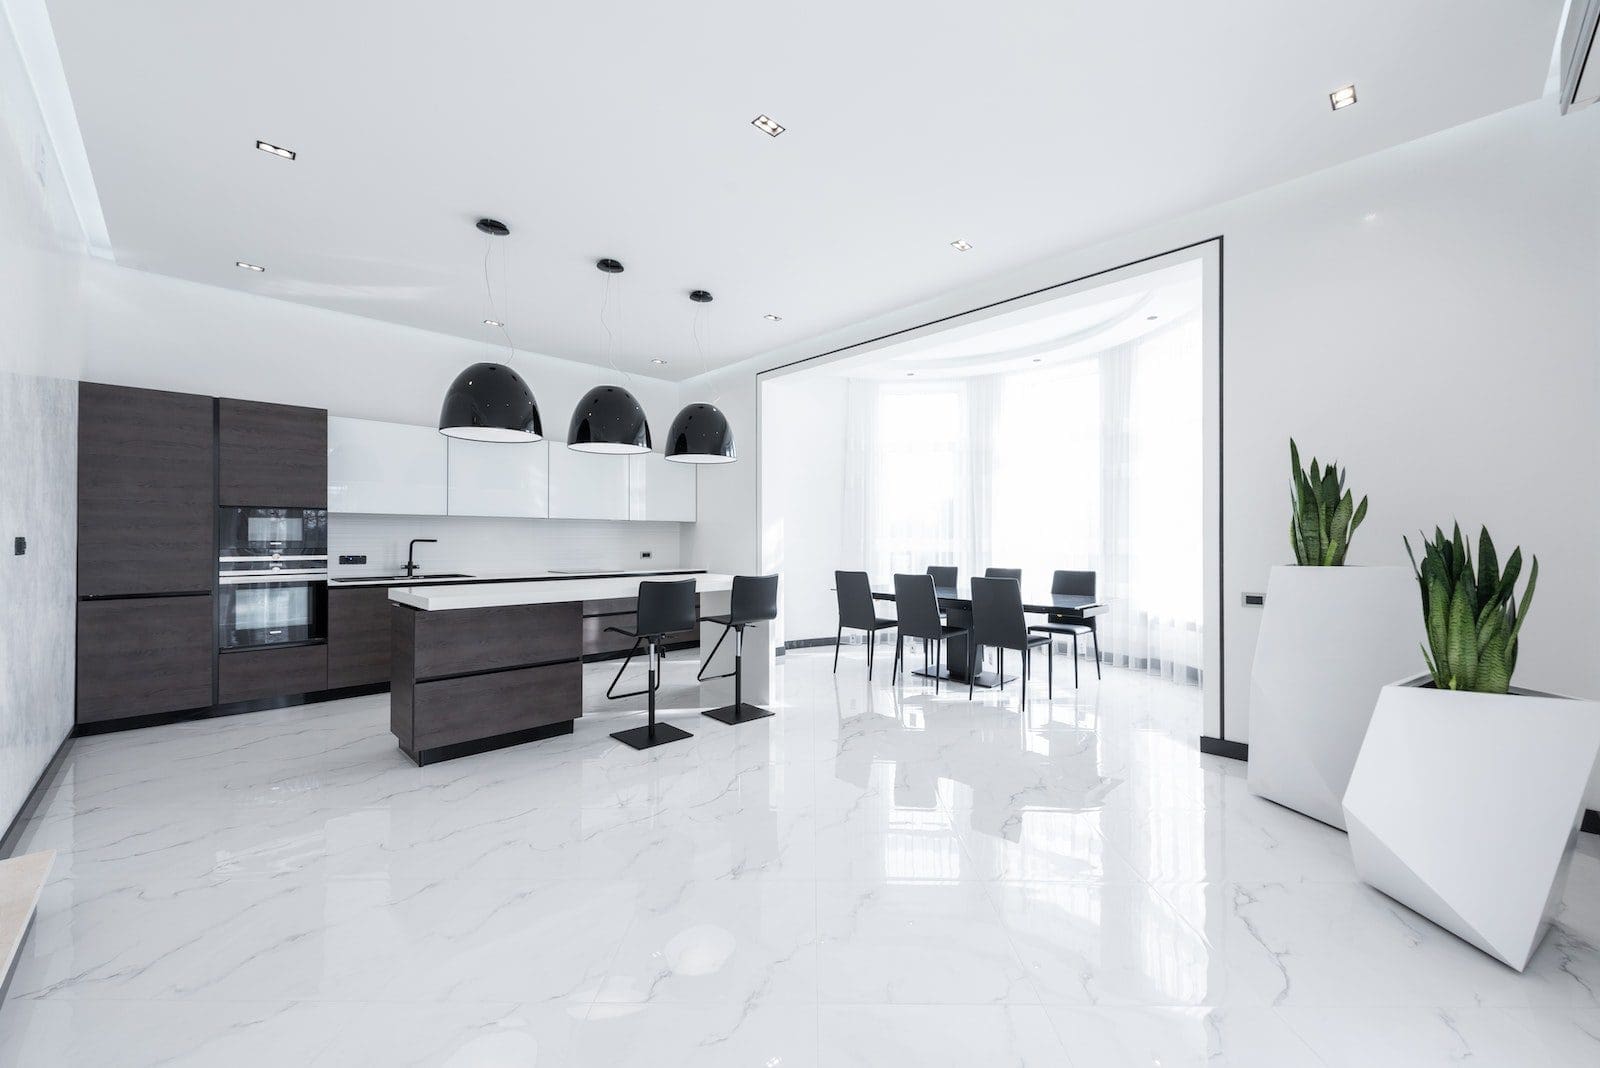 Interior of modern spacious kitchen with minimalist furniture and shiny marble styled floor decorated with creative white pots of fresh green plants